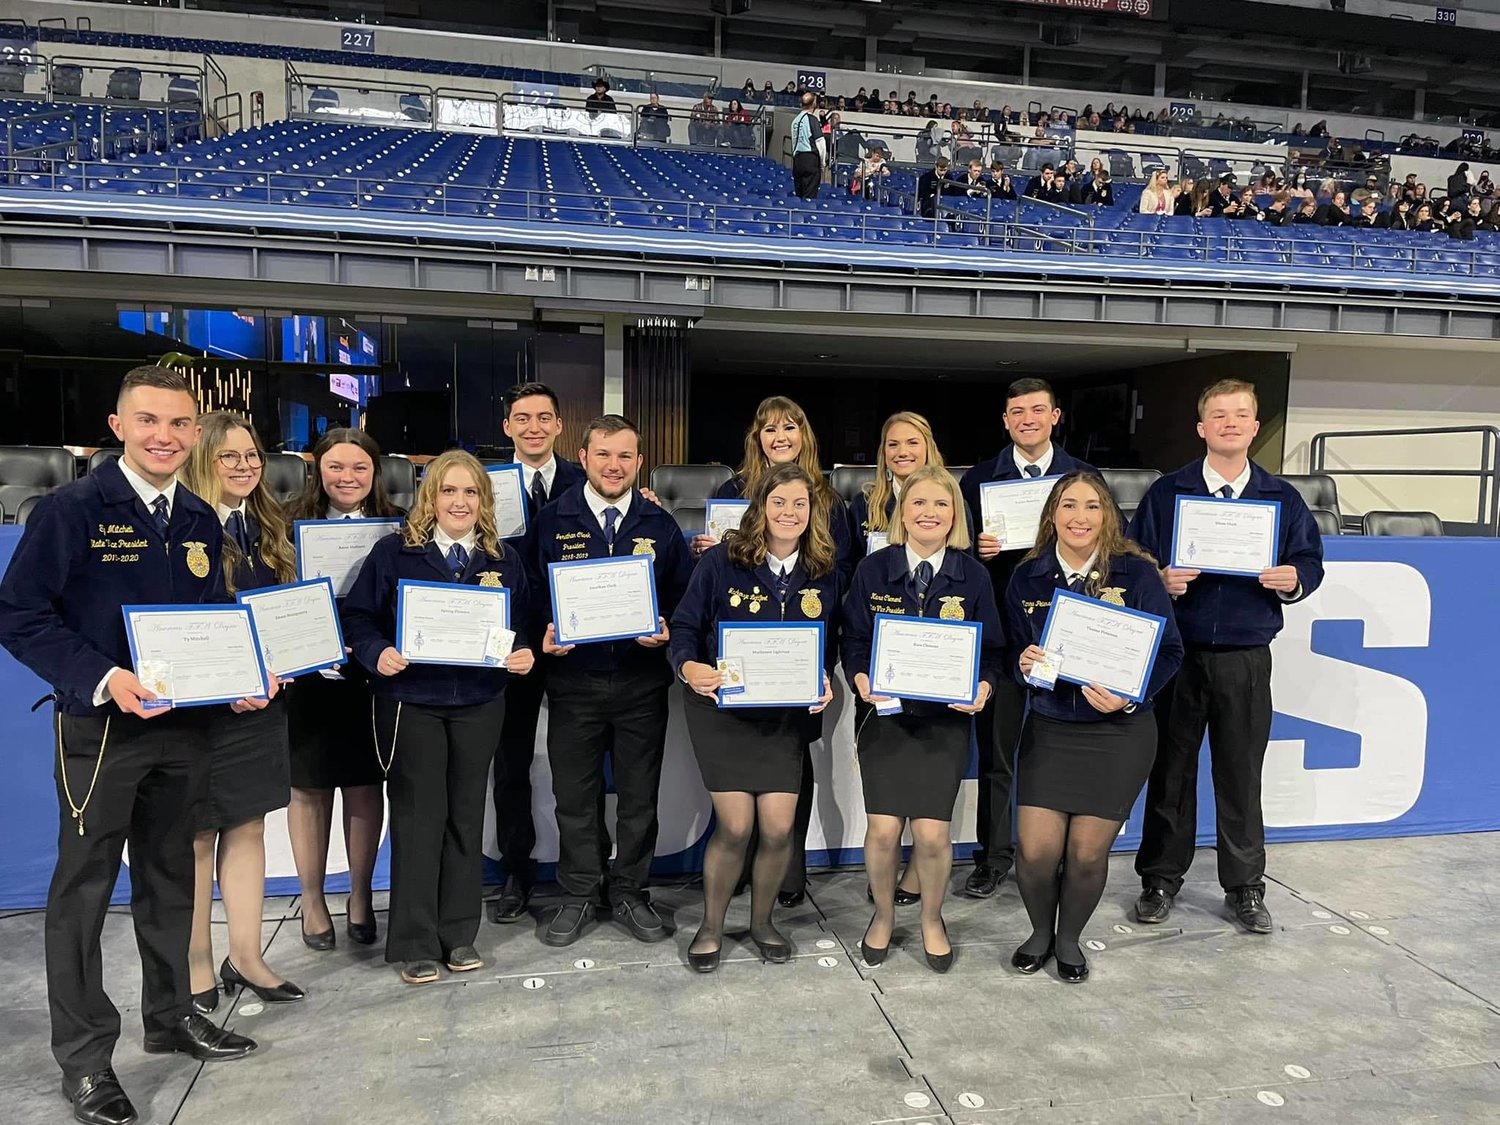 Seven New Mexico State University students were among the 16 recipients from New Mexico to be awarded their American FFA Degree at 2021 FFA National Convention and Expo in October in Indianapolis, Indiana.